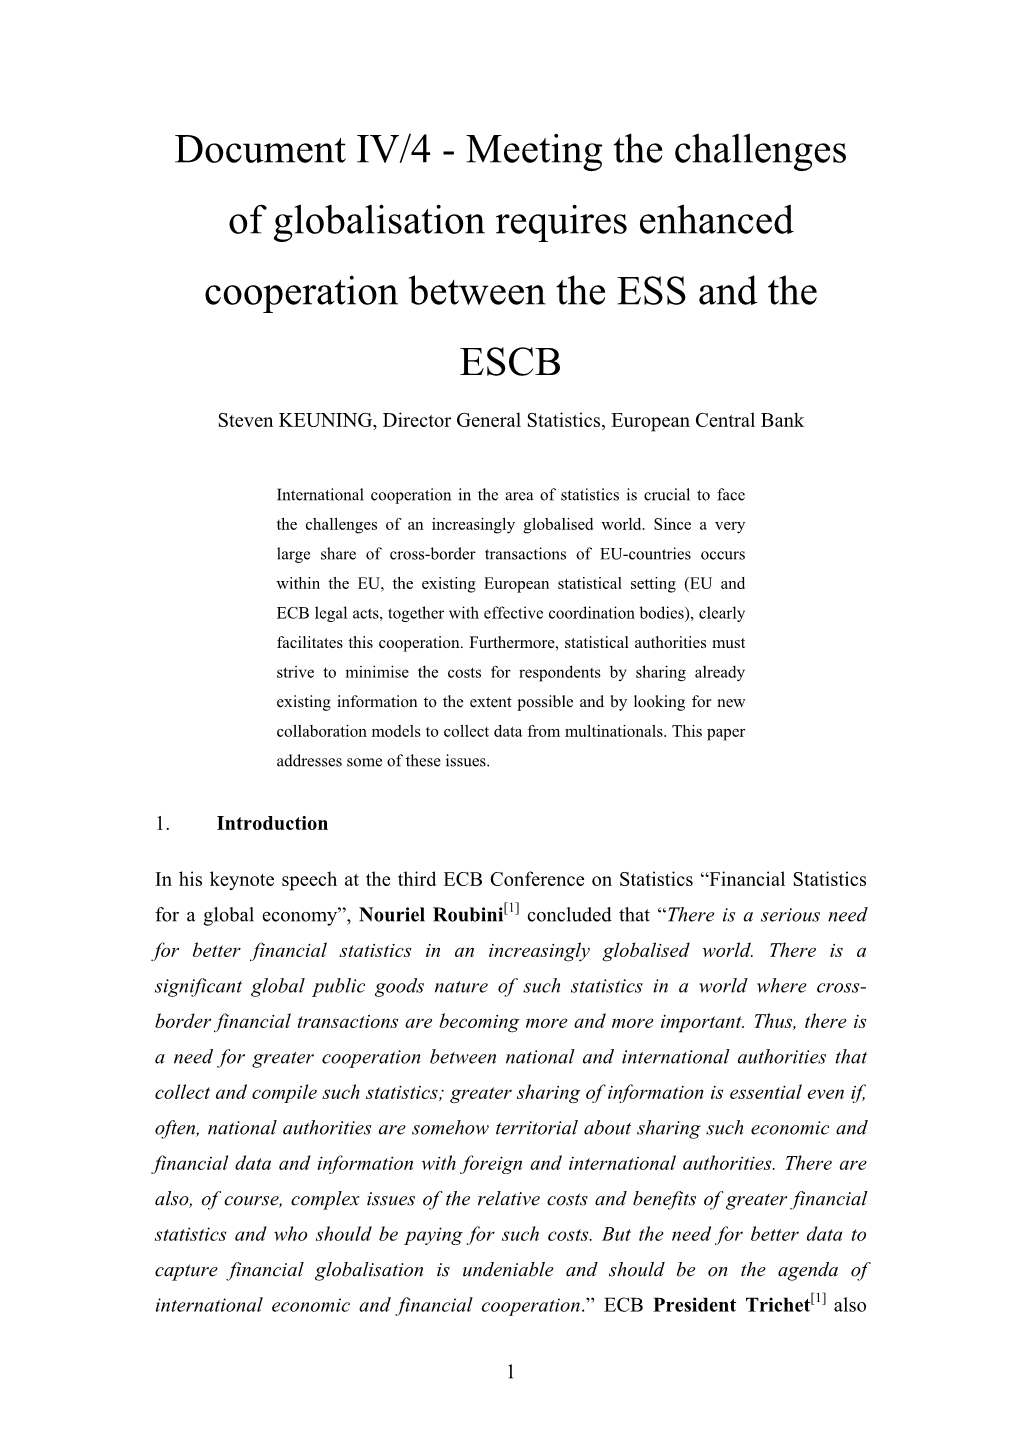 Meeting the Challenges of Globalisation Requires Enhanced Cooperation Between the ESS and the ESCB